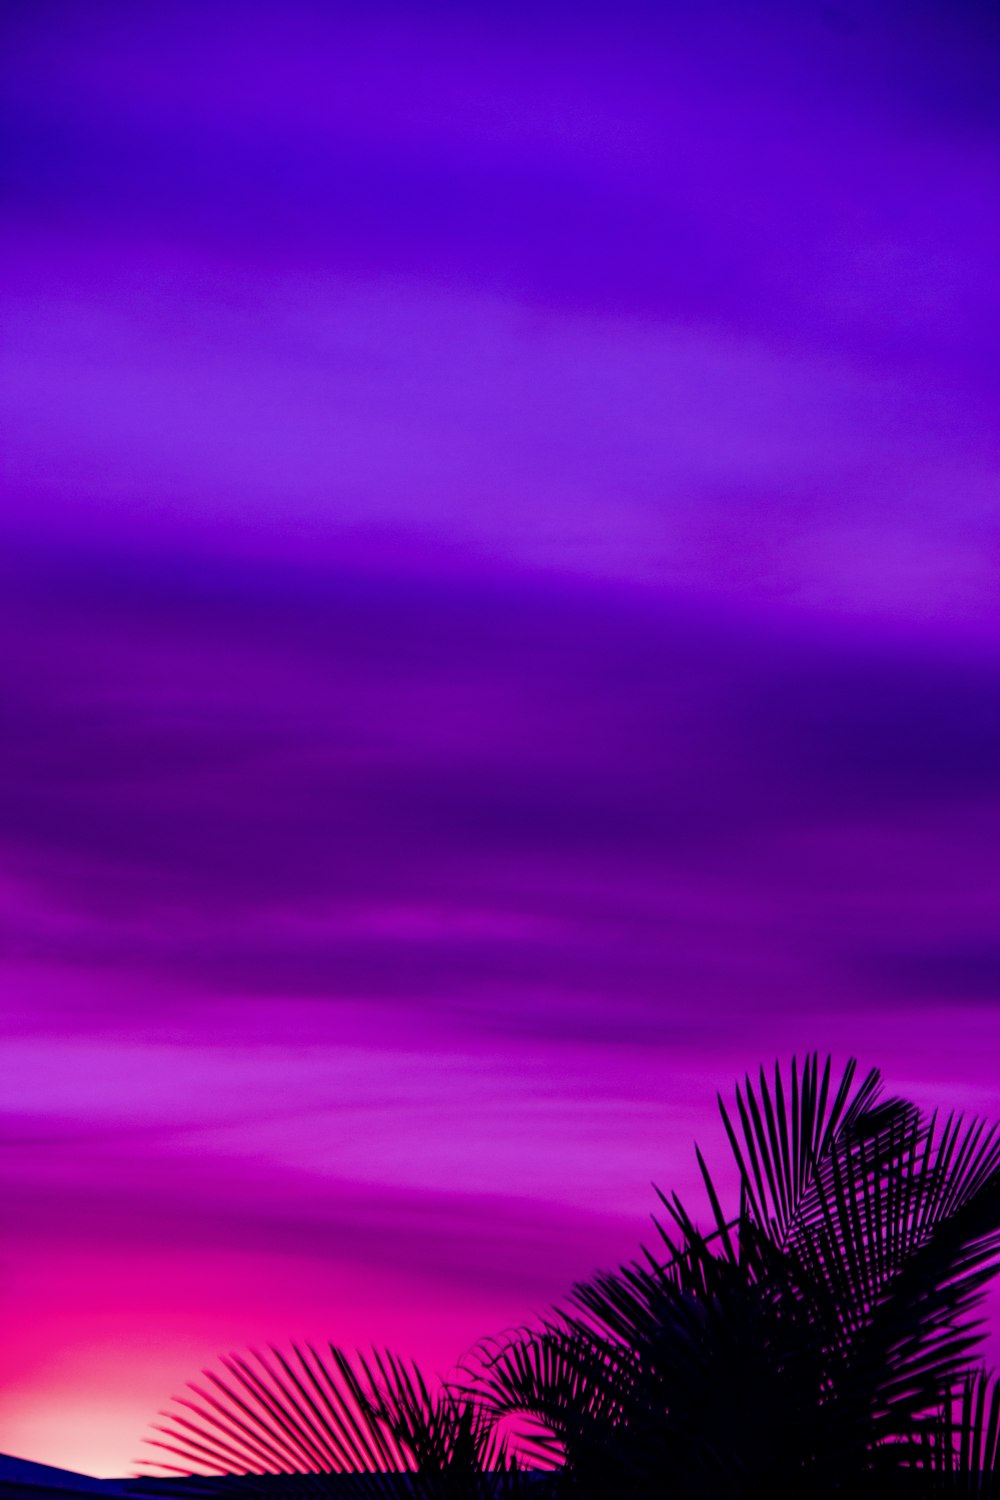 750+ Purple Aesthetic Pictures  Download Free Images on Unsplash